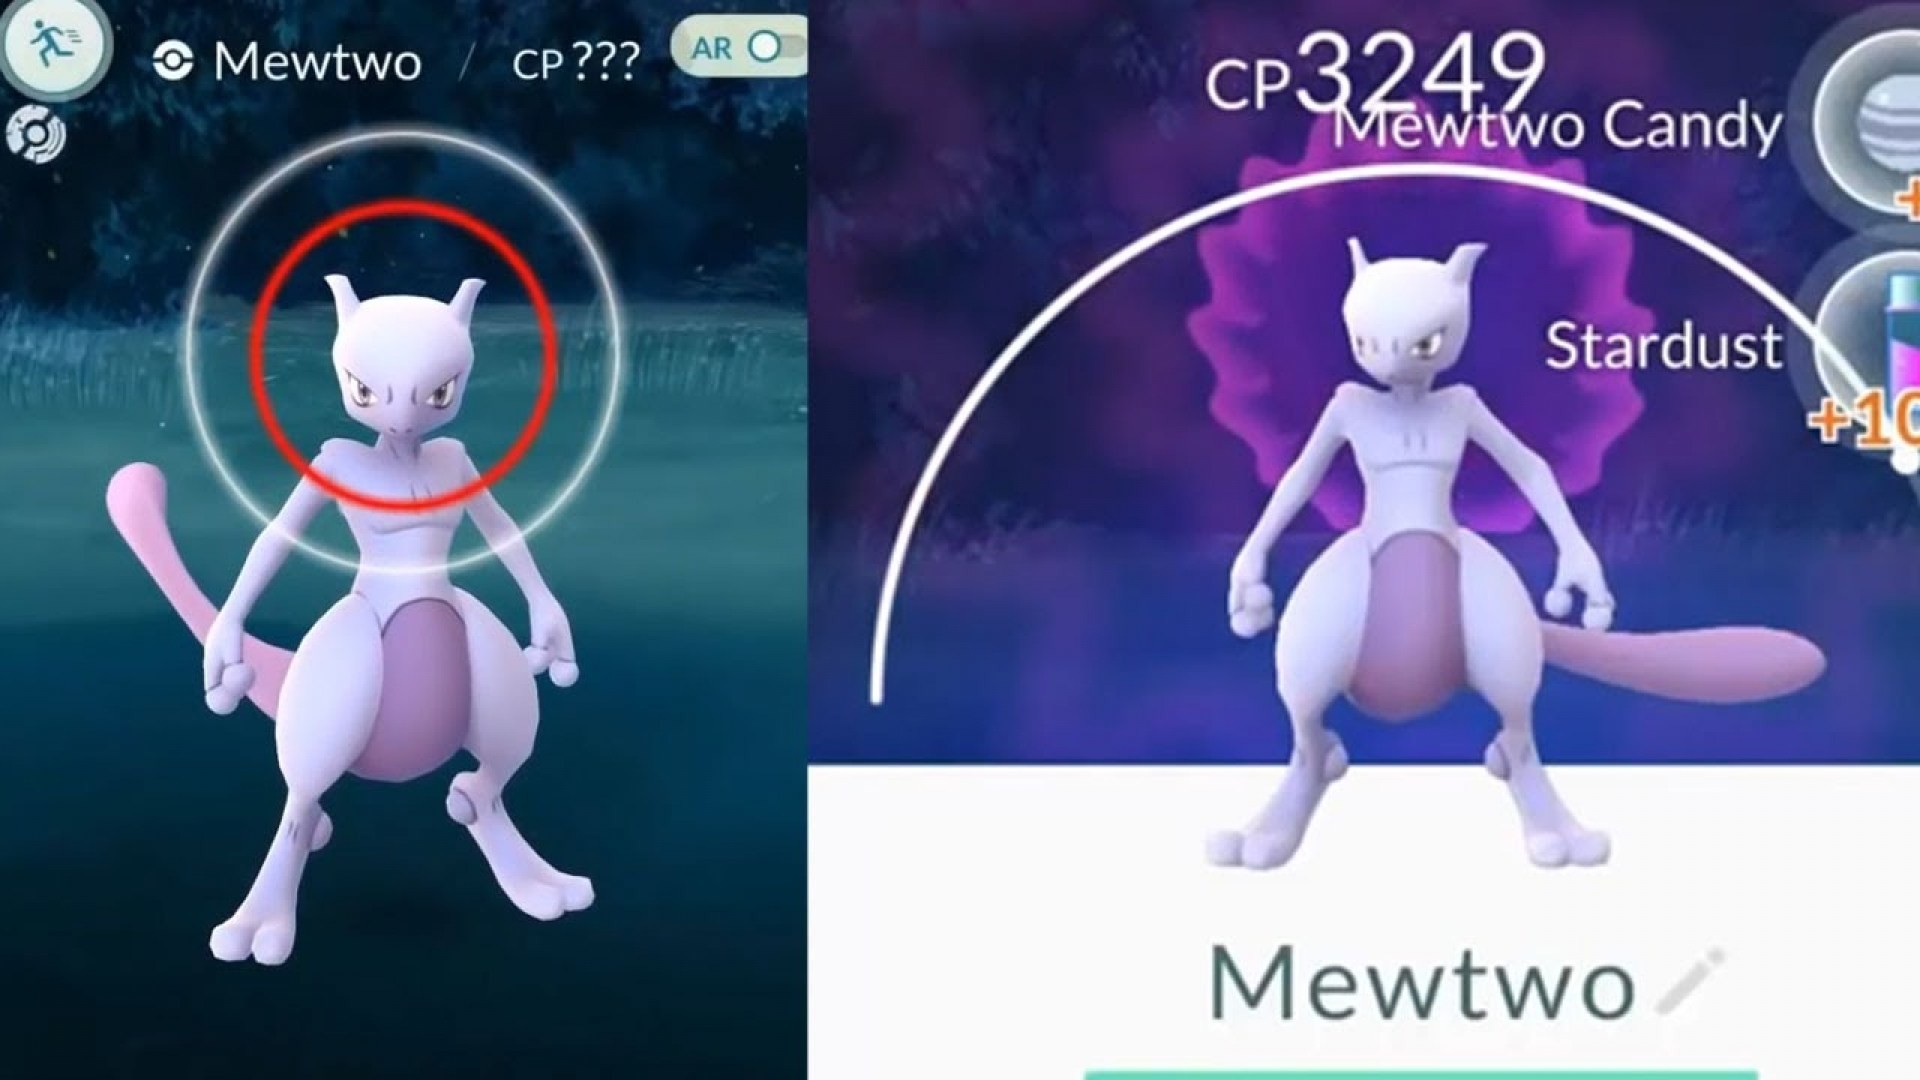 1920x1080 Pictures Of Pokemon Go Game Characters Mewtwo And Mew 1280Ã720 HD Wallpapers  1920Ã1080